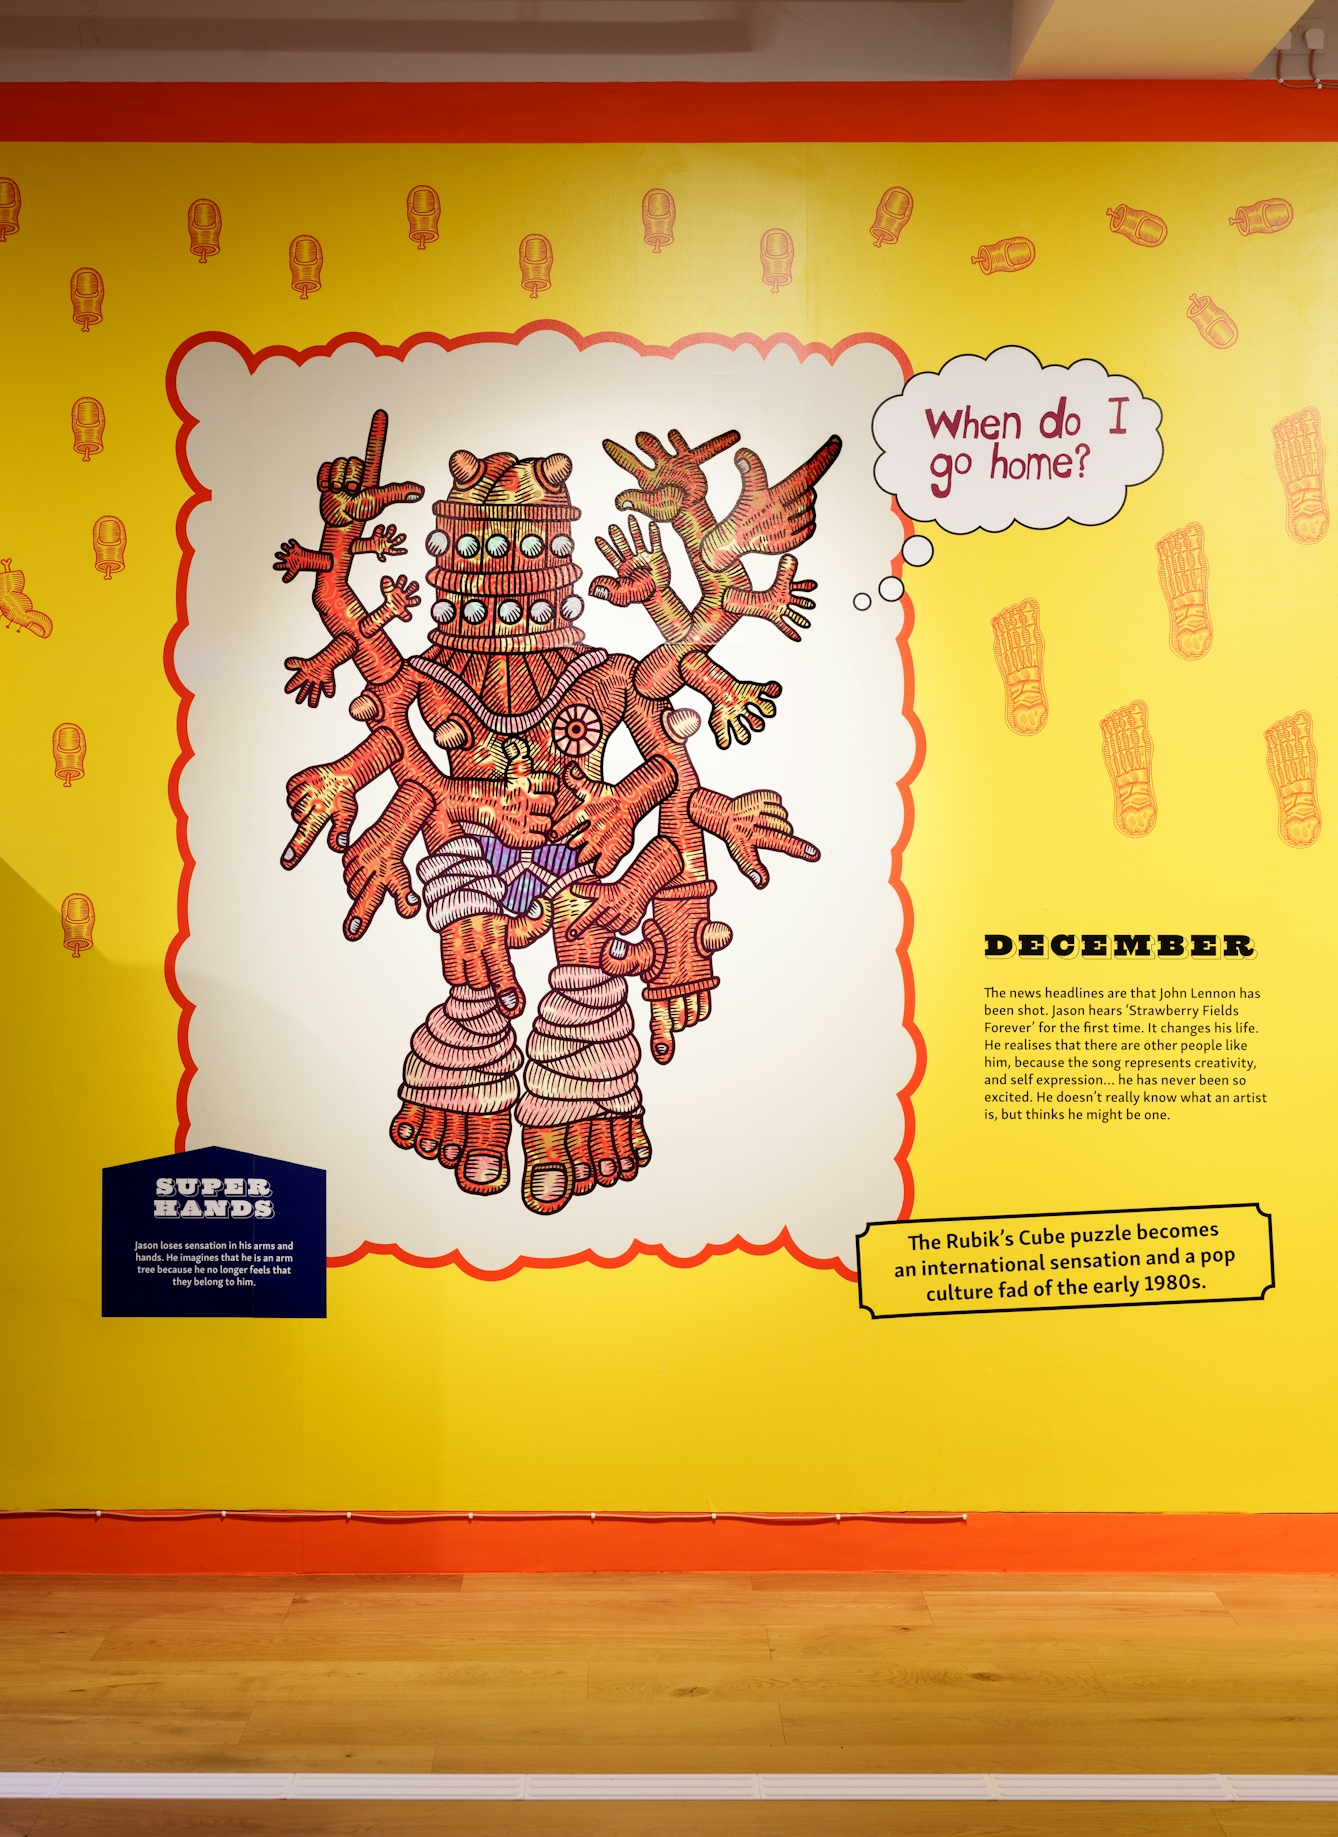 Photograph of a colourful yellow wallpaper mural covering an entire gallery wall. The mural contains text and drawings. This section show a multi-handed character pointing in all directions. The text beside it is titled 'December'.